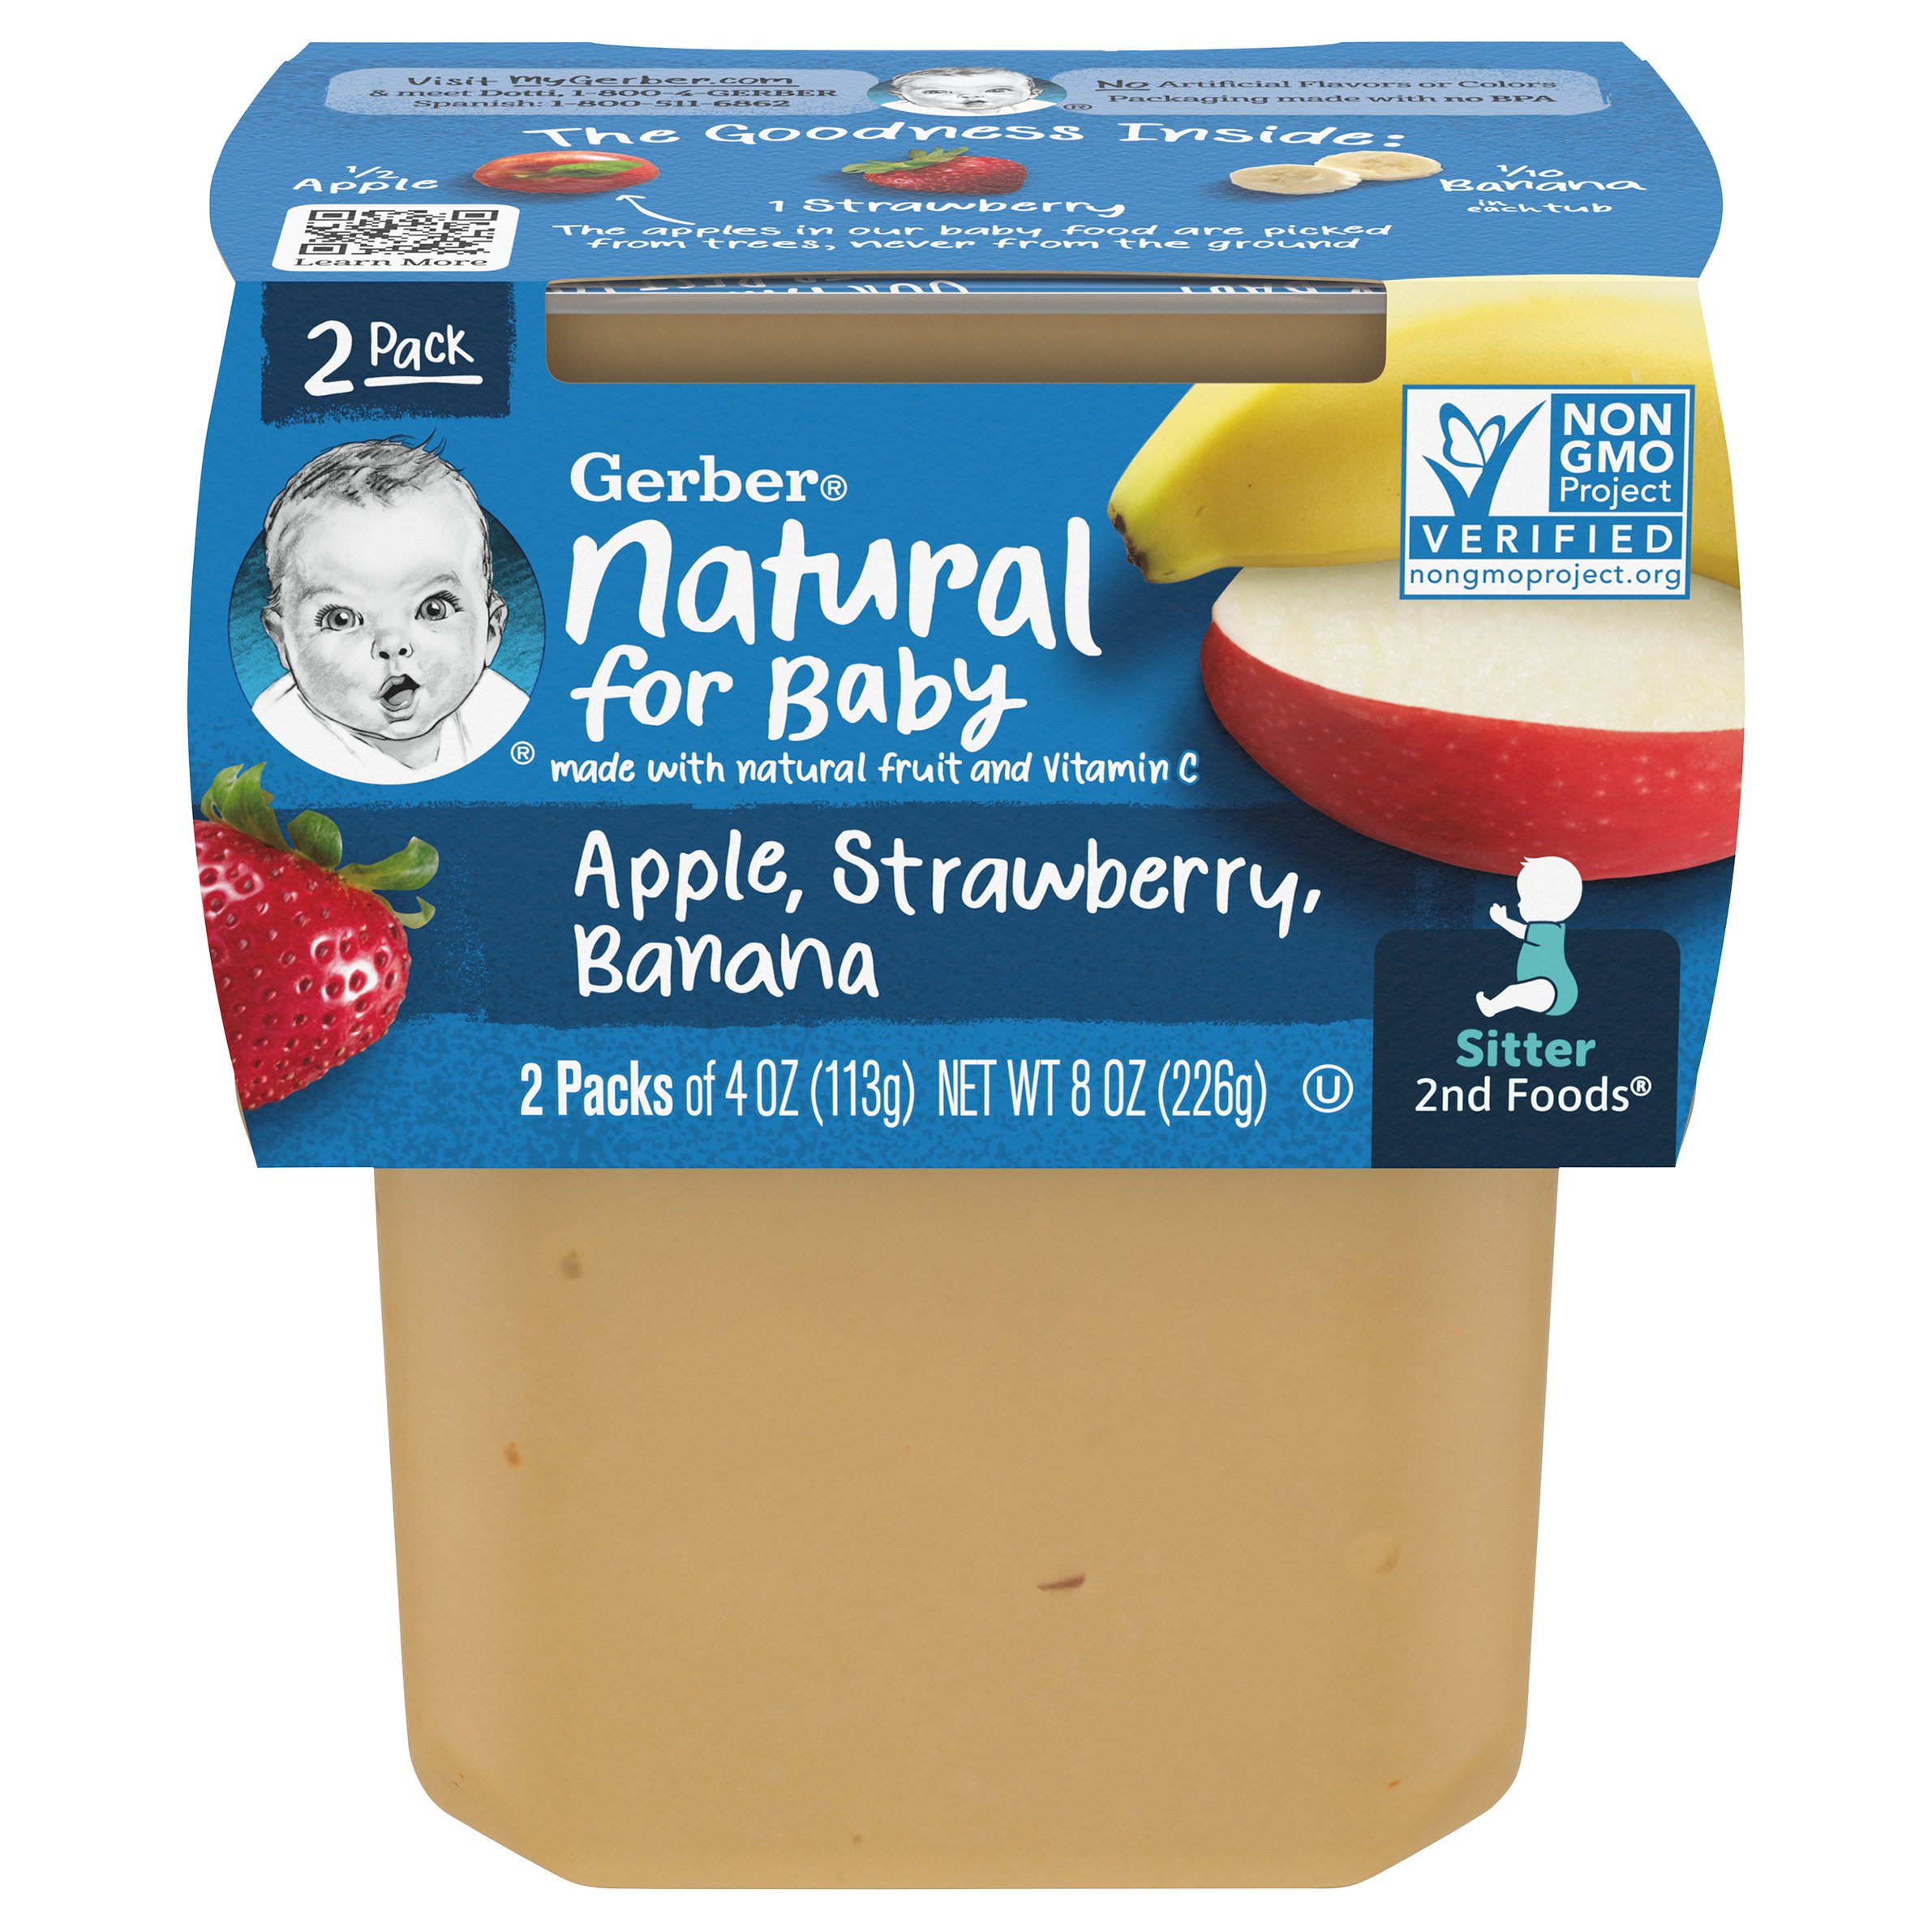 Gerber Snacks for Baby Grain & Grow Puffs Variety Pack - Banana &  Strawberry Apple - Shop Toddler Food at H-E-B